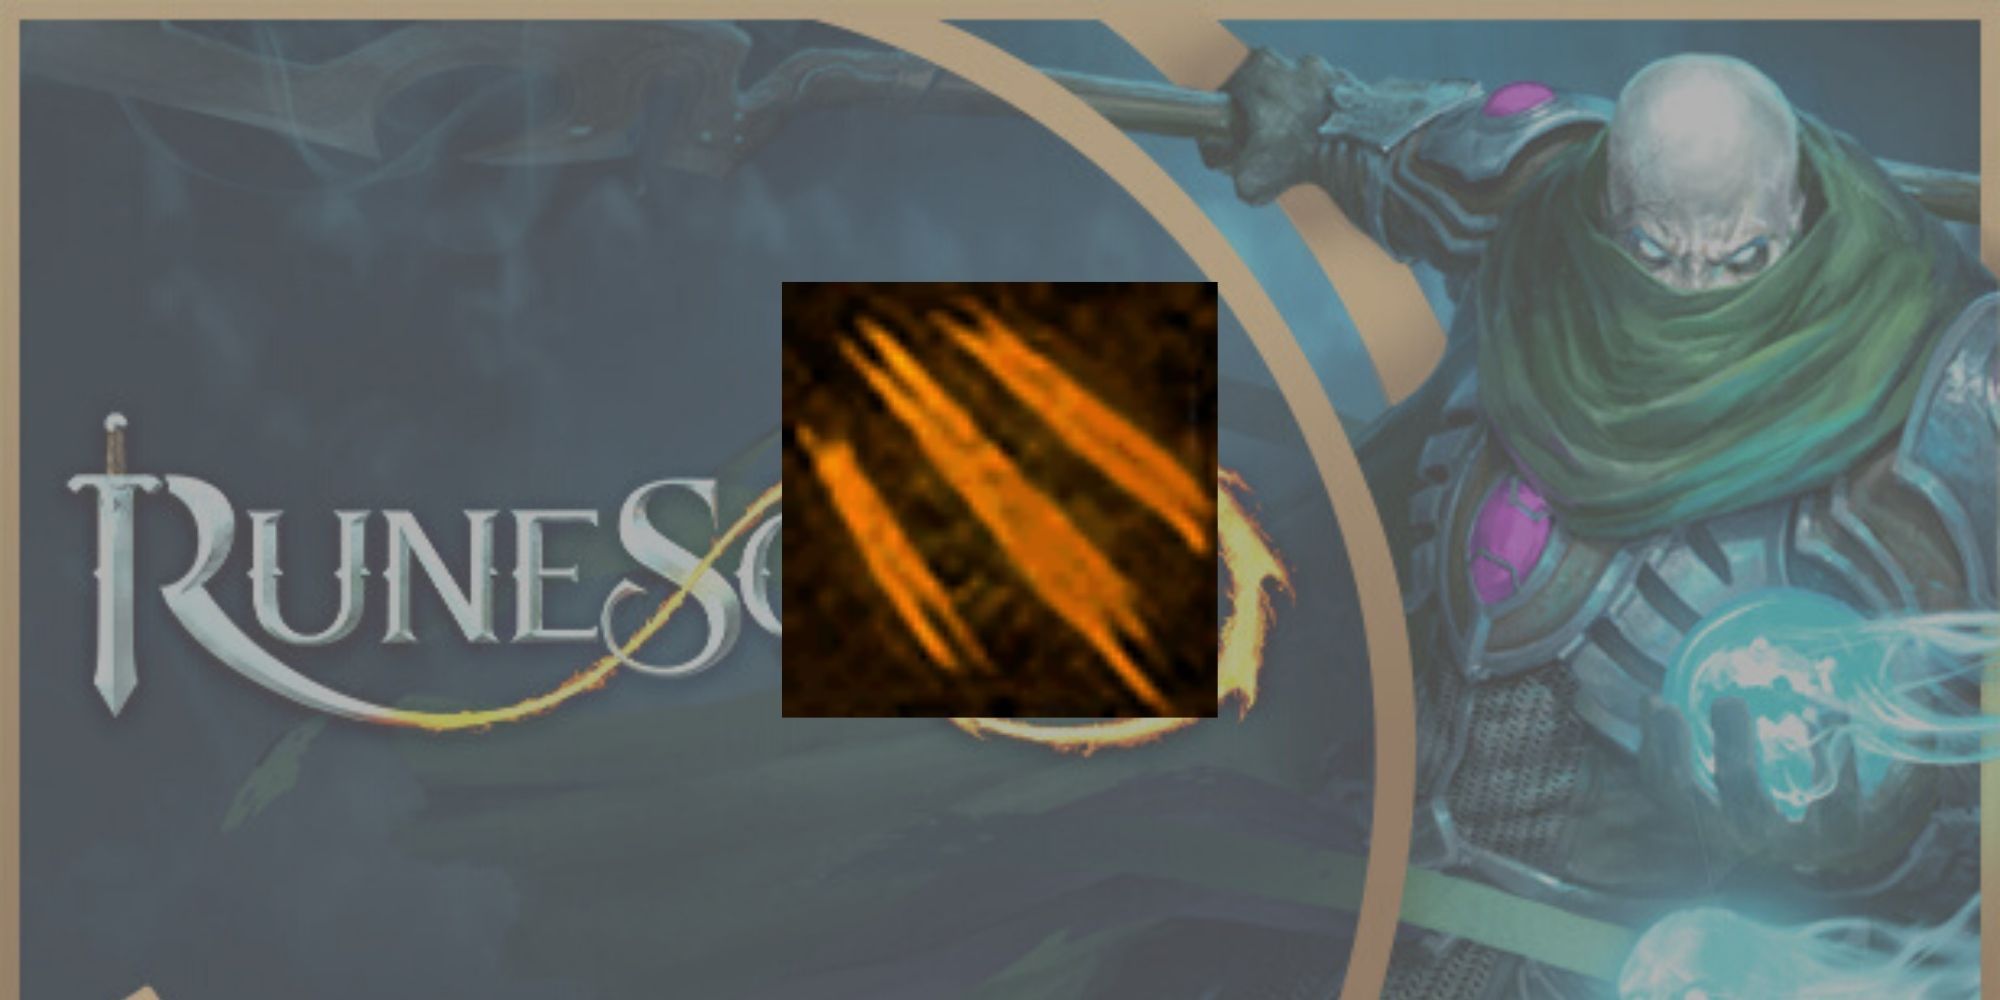 The Dismember melee ability icon superimposed over an official RuneScape 3 promo image.